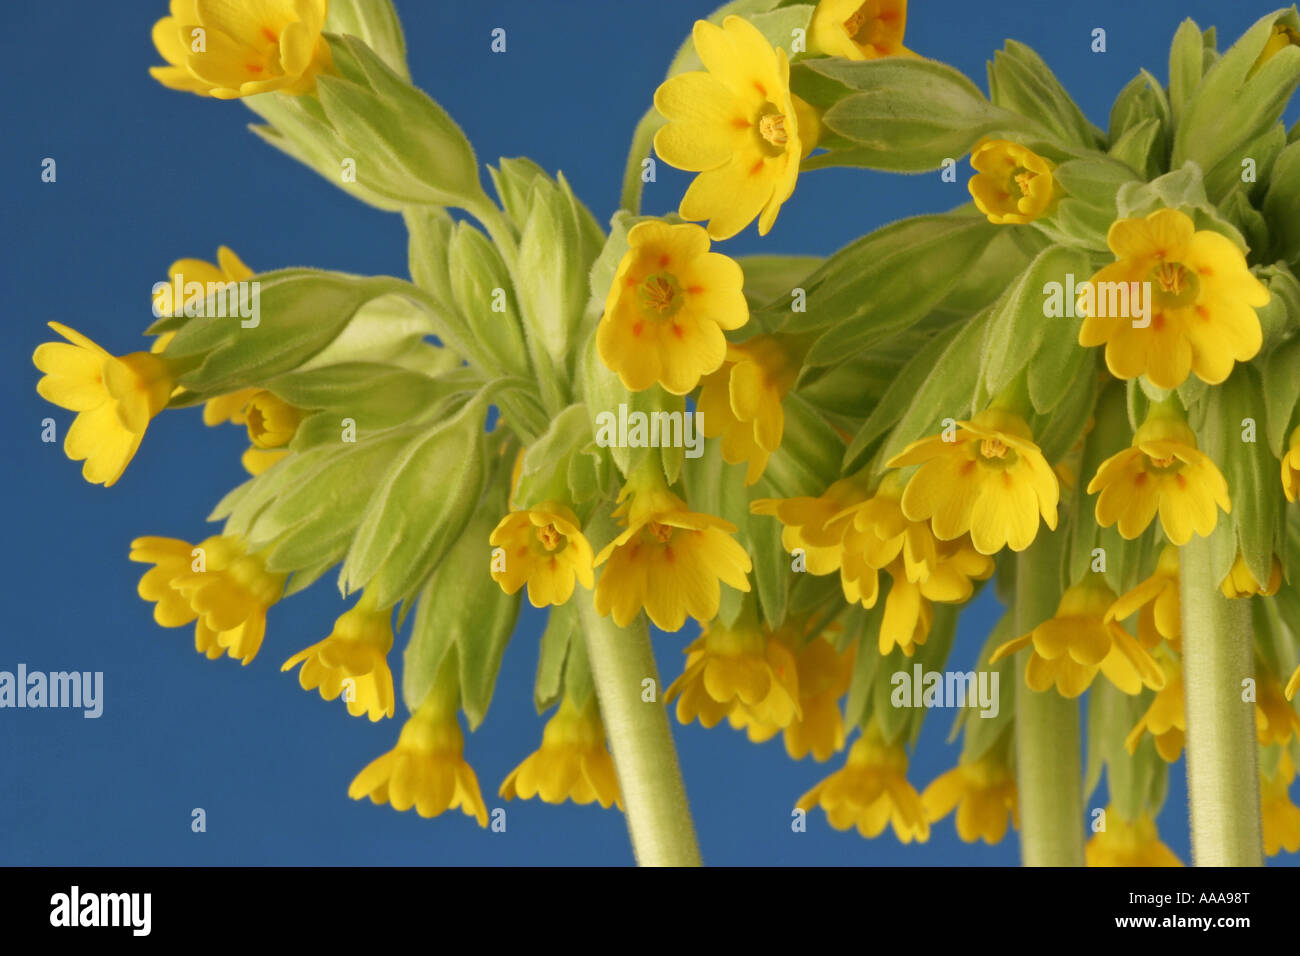 Cowslip flowers on a blue back ground Stock Photo